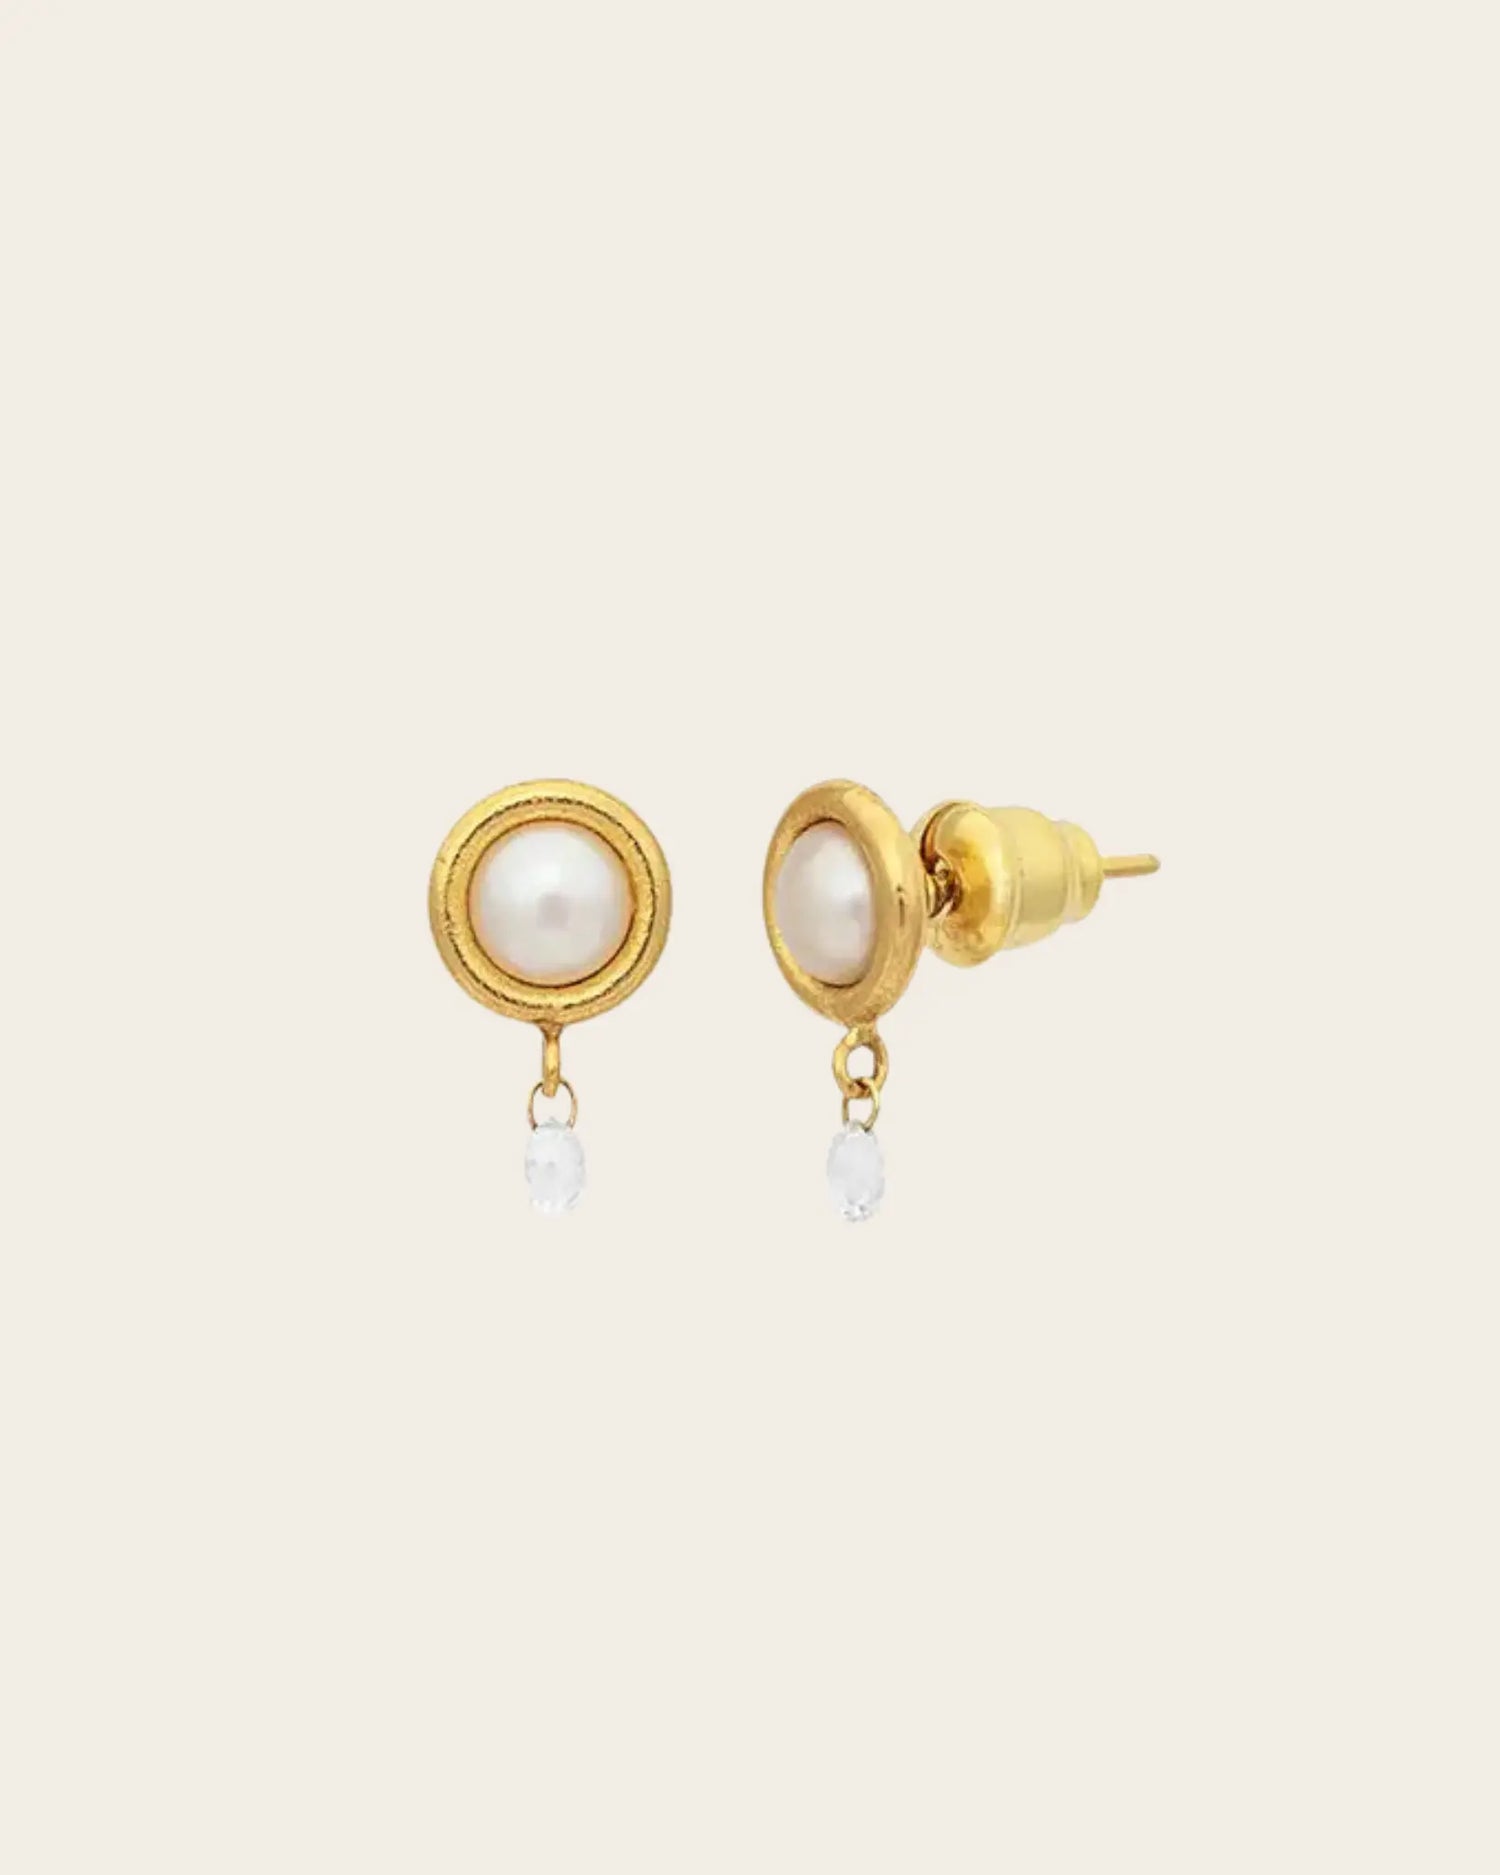 GURHAN Oyster Gold Single Drop Earrings, with Pearl and Diamond GURHAN Oyster Gold Single Drop Earrings, with Pearl and Diamond Gurhan Gurhan  Squash Blossom Vail